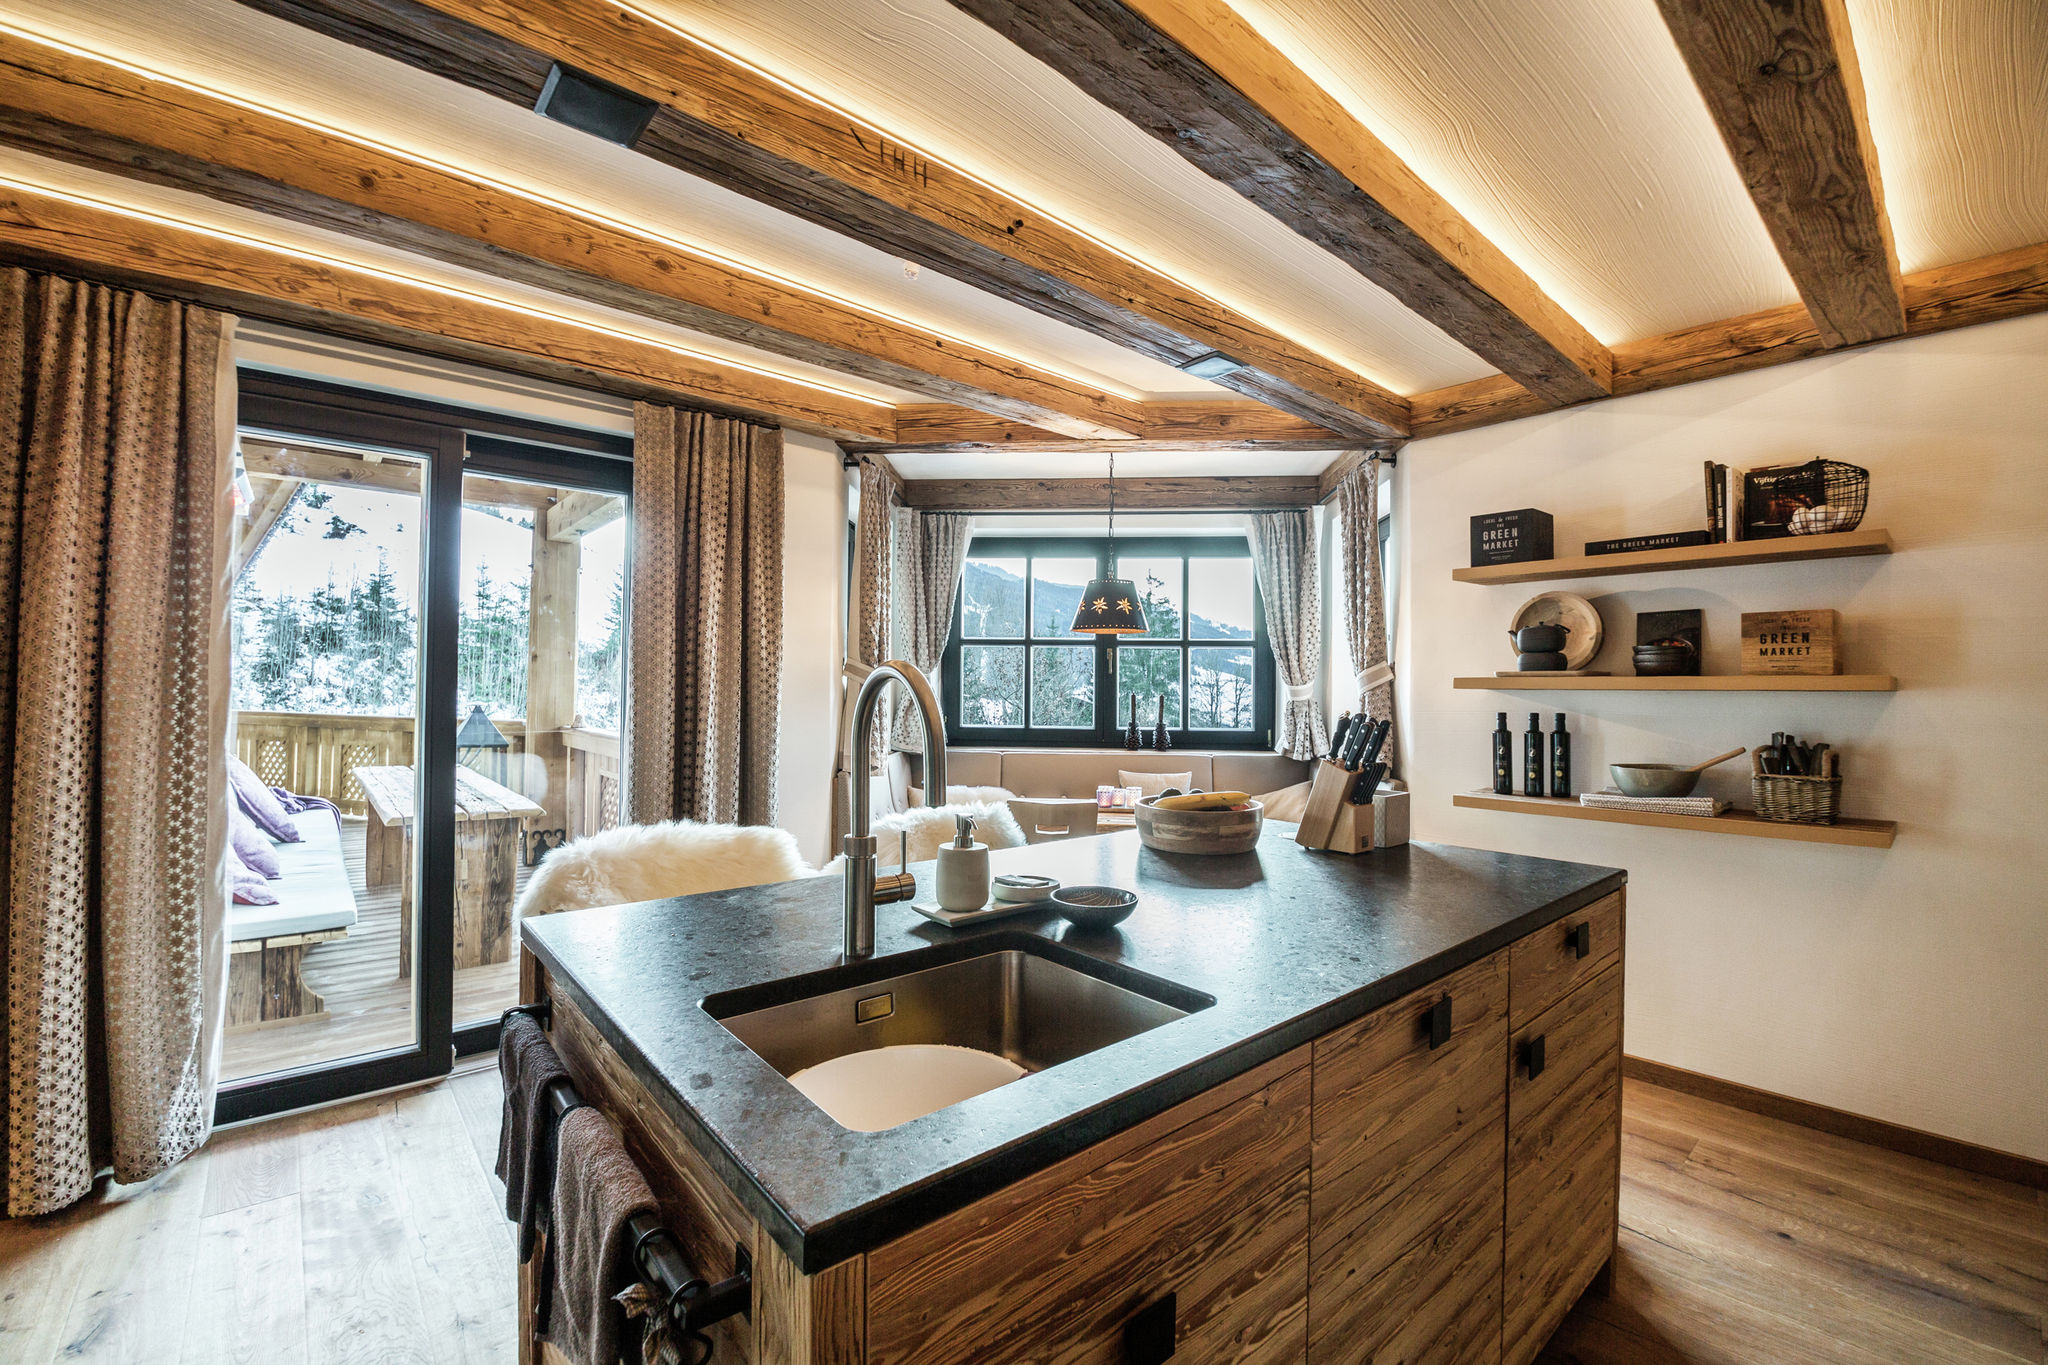 Premium chalet in Wagrain with 2 saunas and pool